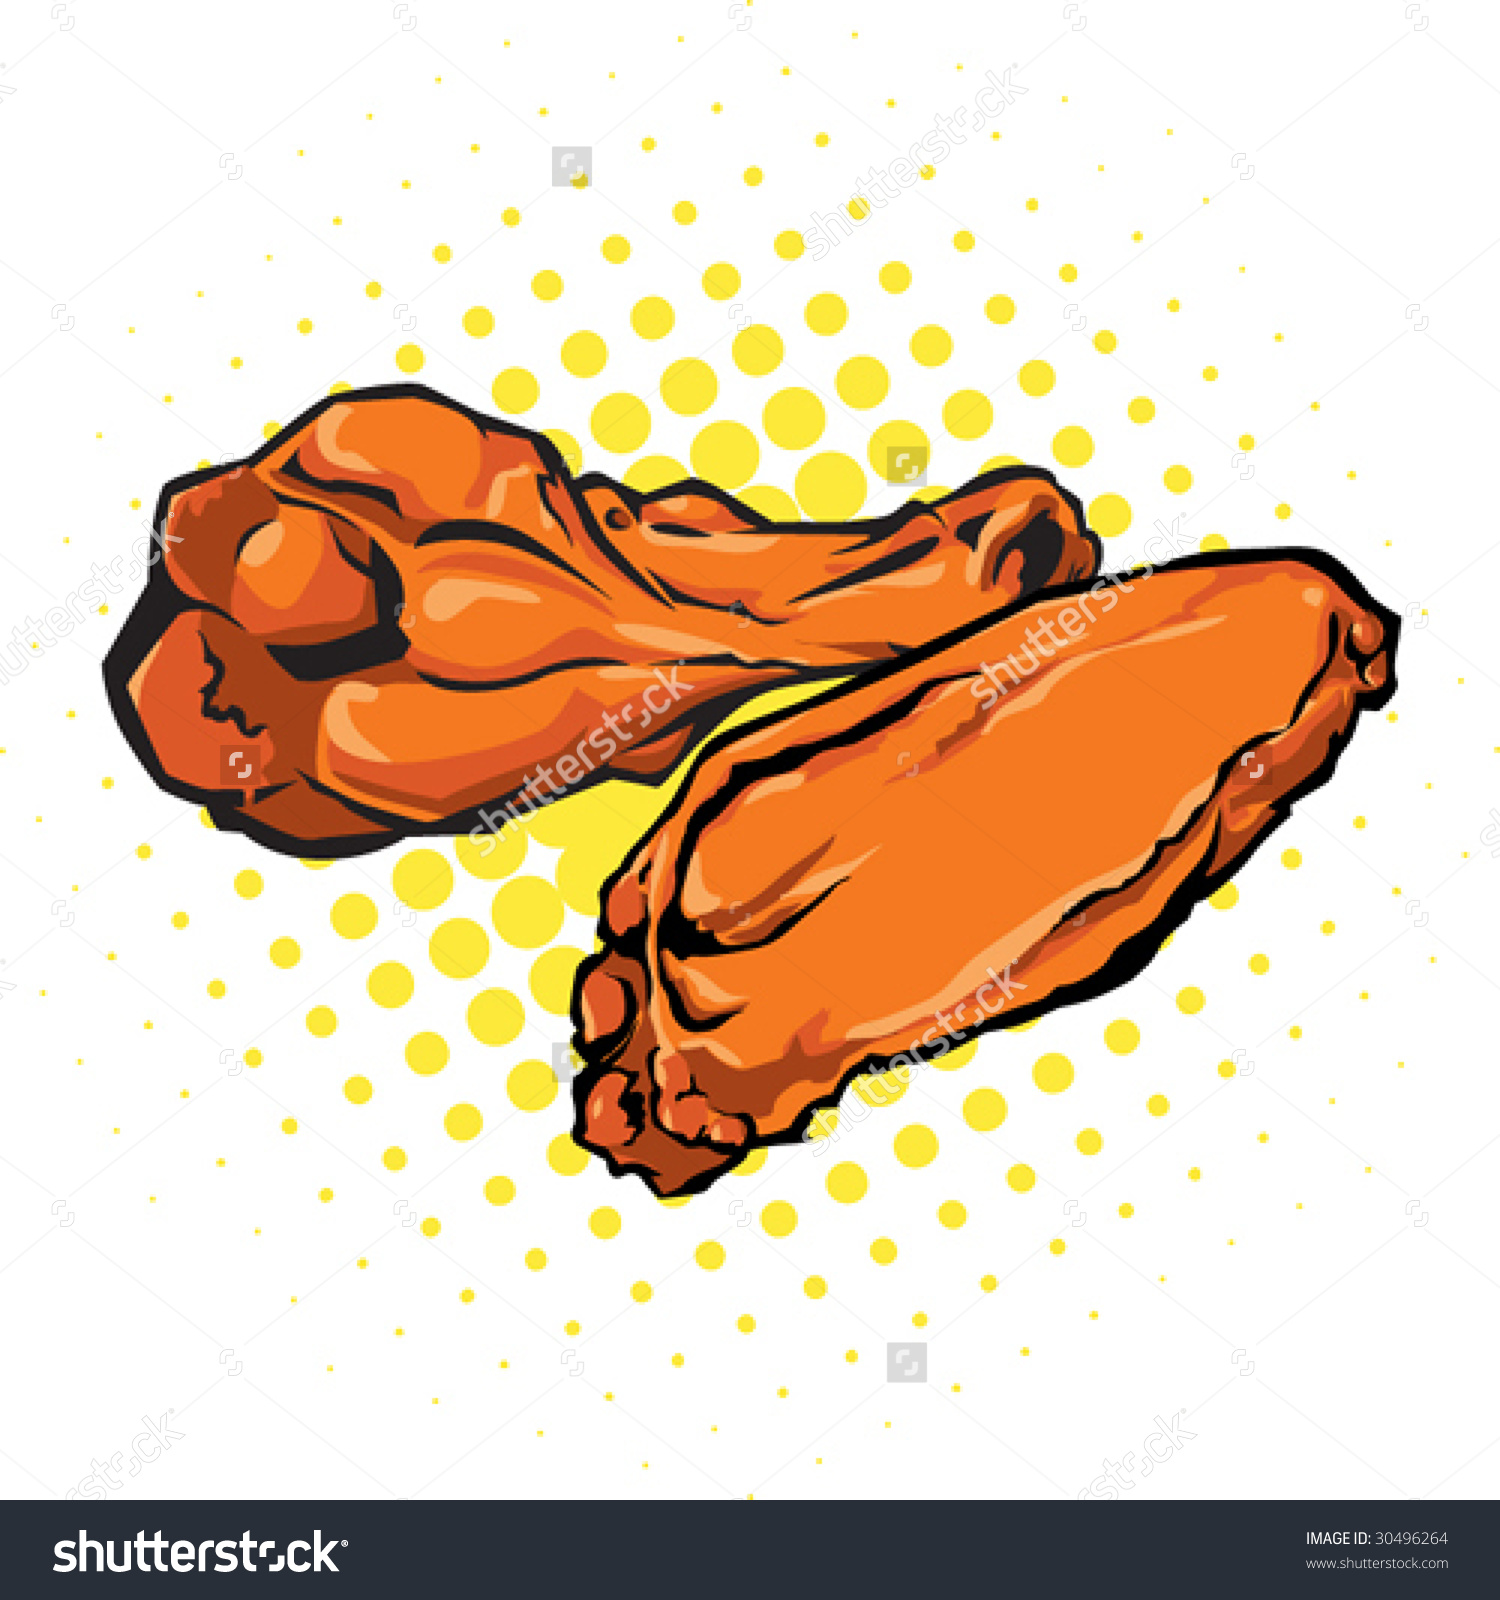 Fried chicken wings clipart - Clipground